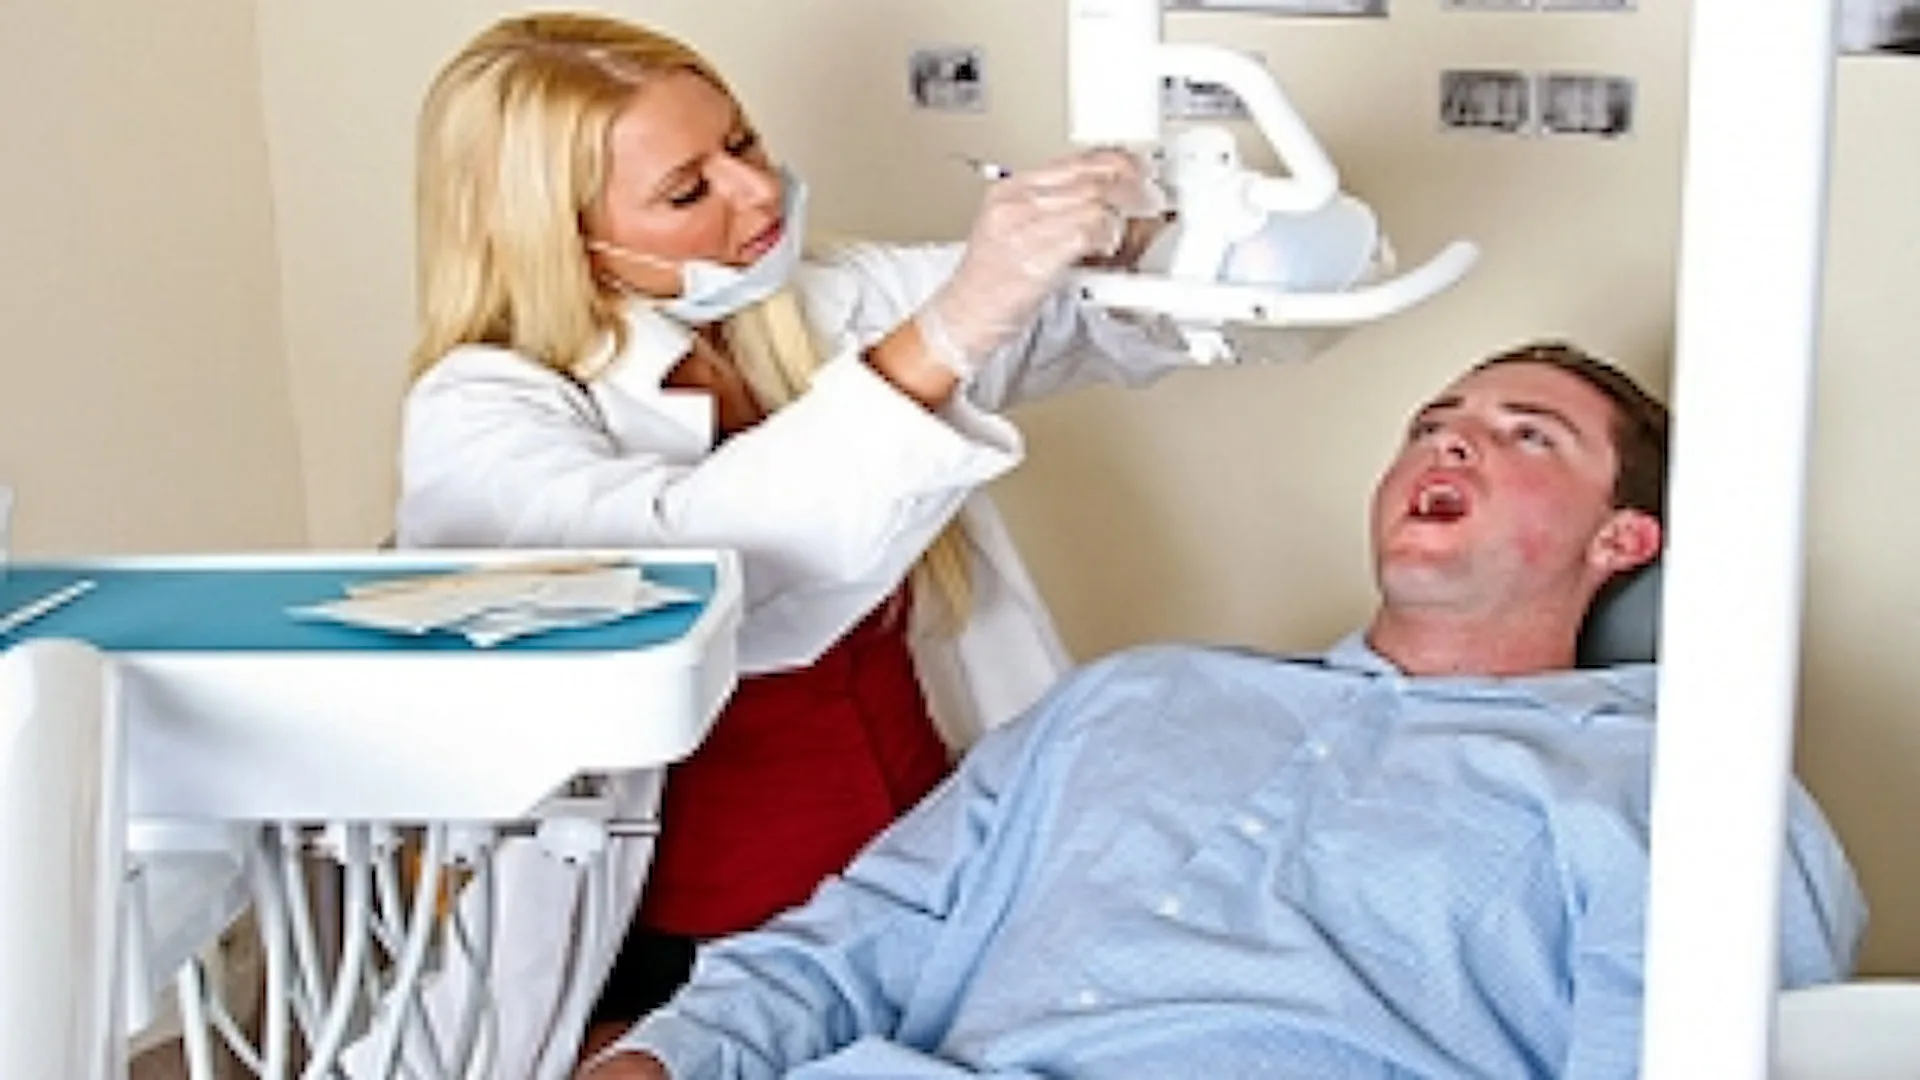 Don't fear the Dentist - Doctor Adventures